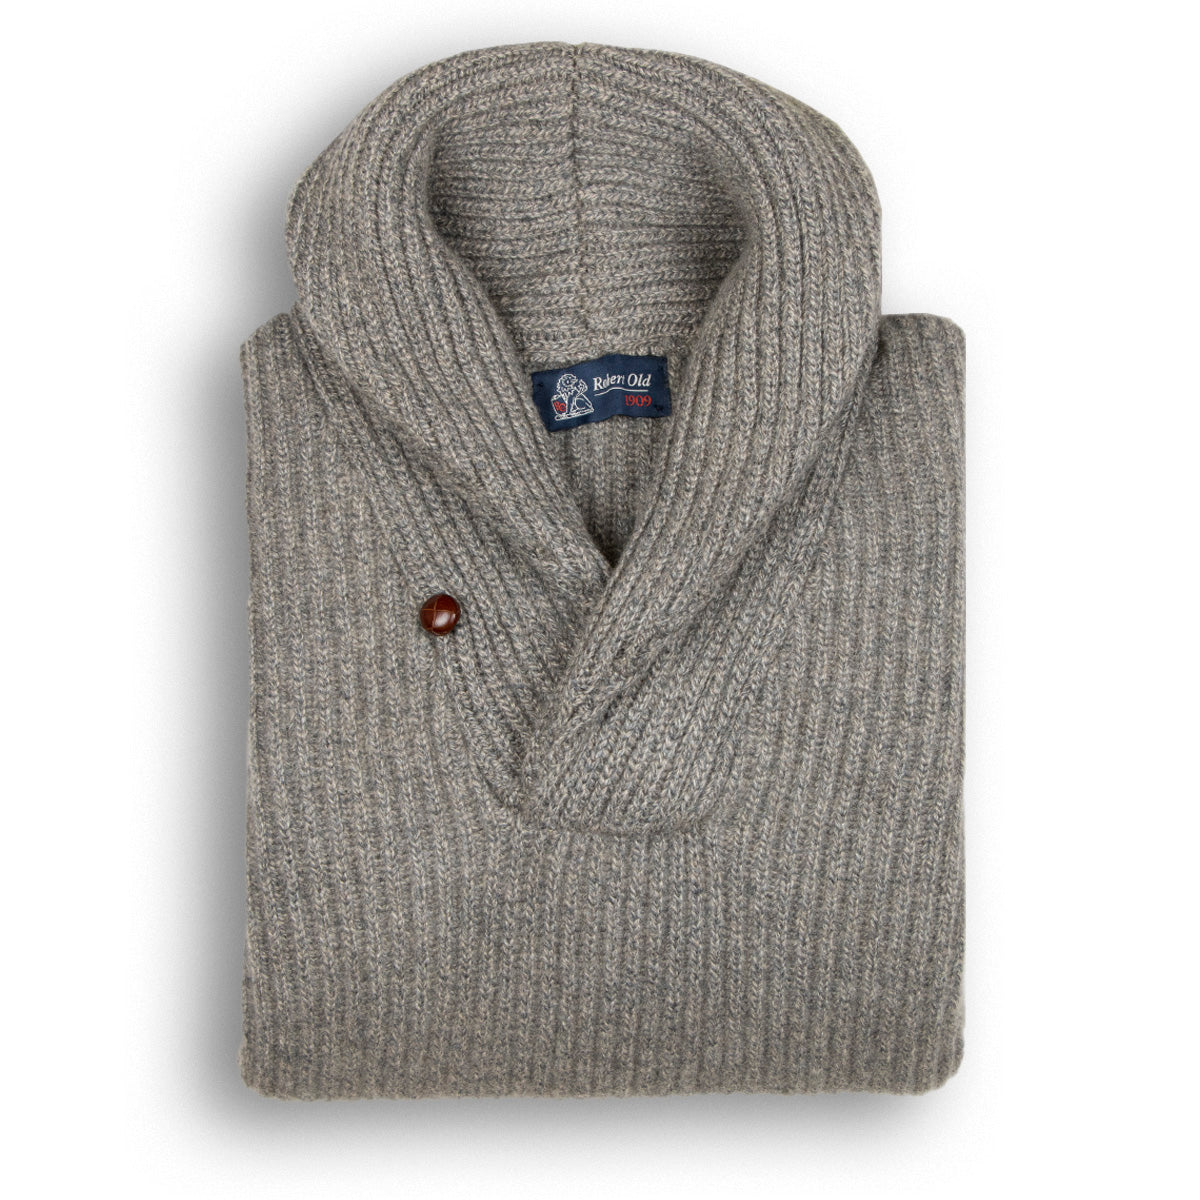 Stoneage Derby Torridon 8Ply Cashmere Shawl Collar Pullover  Robert Old Stoneage - Derby UK 48" 